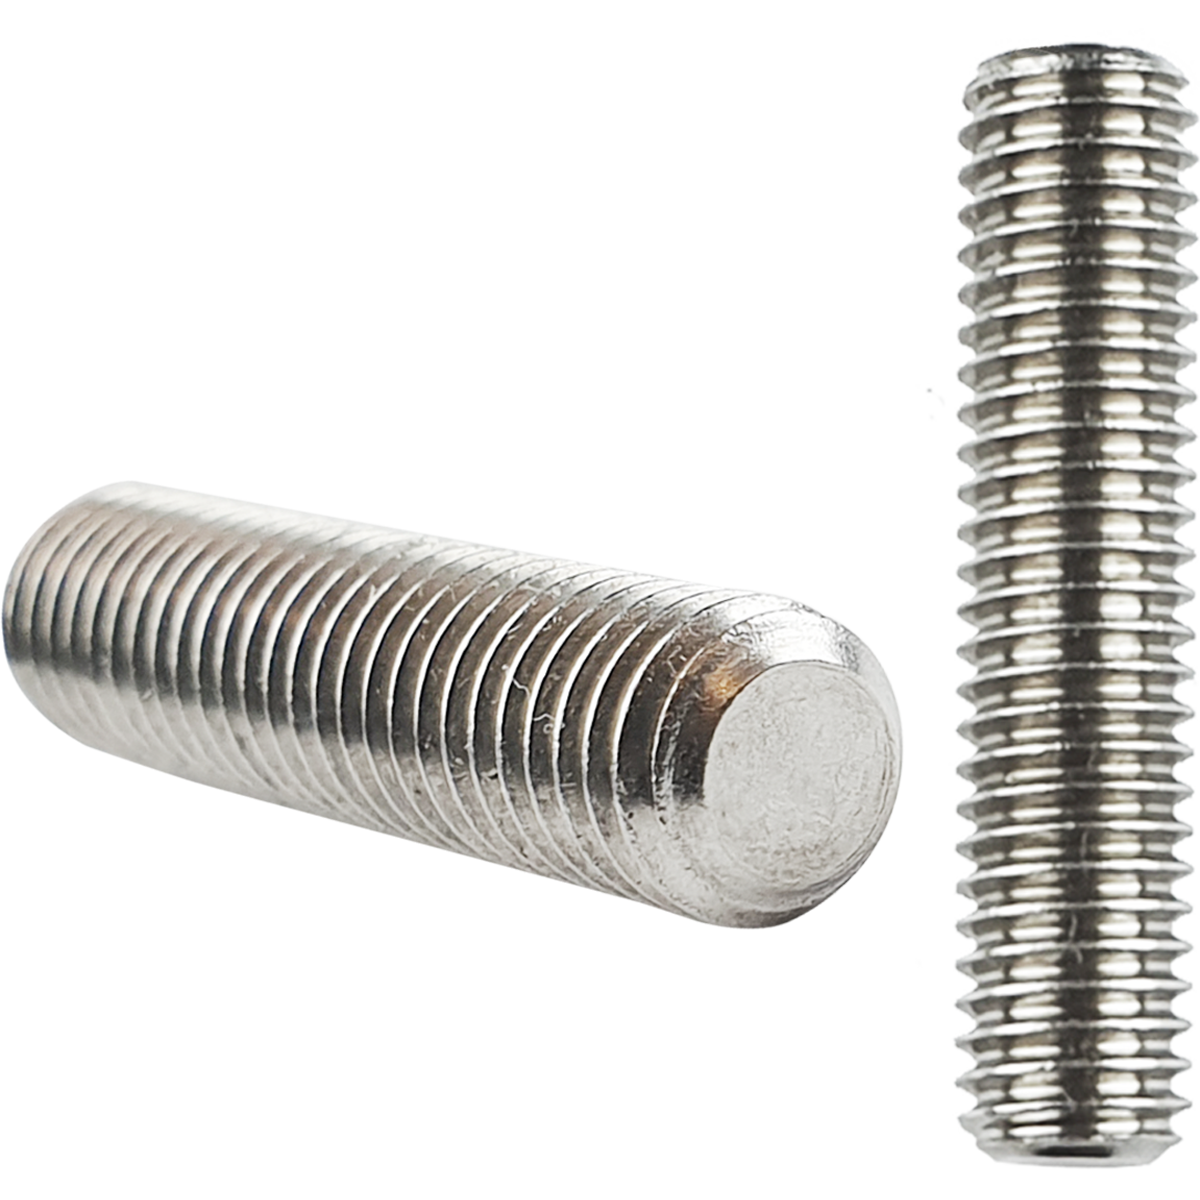 Socket Set Screws, also known as grub screws. Versatile and available in a variety of sizes